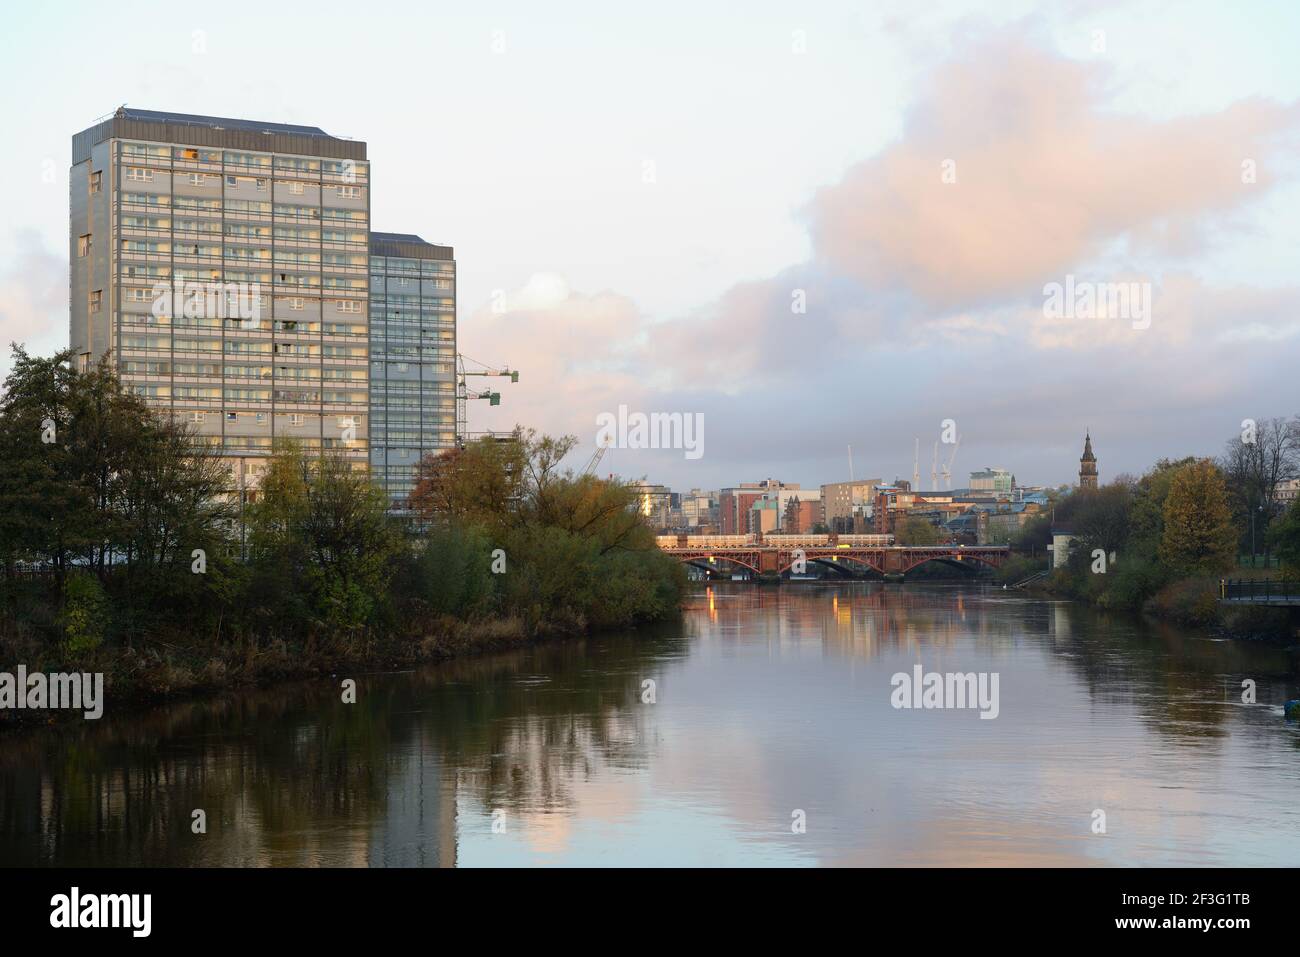 High rise residential tower blocks lit by early morning sun by the river Clyde in Glasgow city centre, Scotland UK Stock Photo